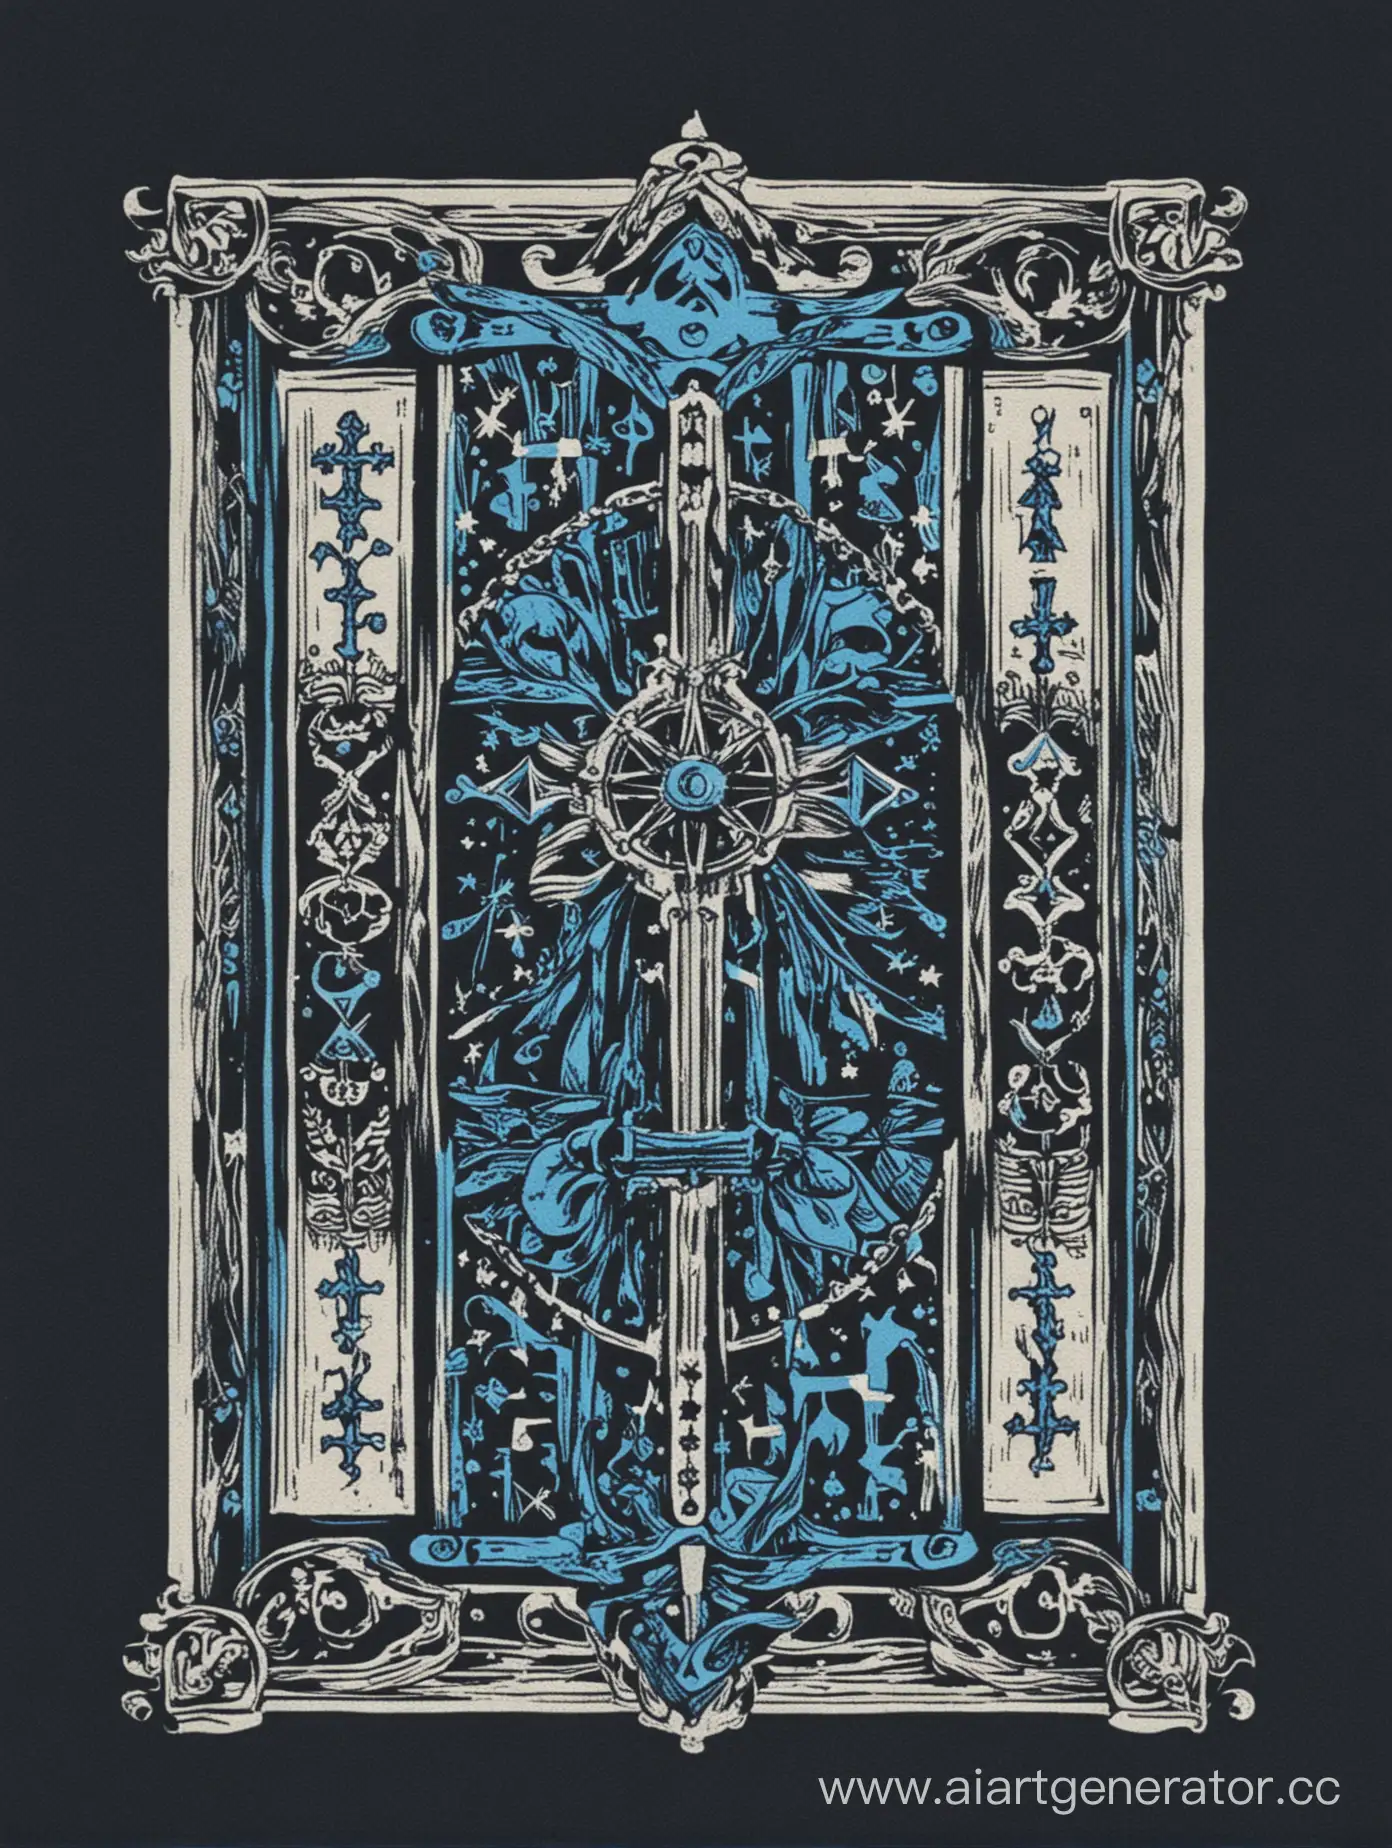 Mystical-Tarot-Card-Shirt-with-Black-White-and-Blue-Color-Scheme